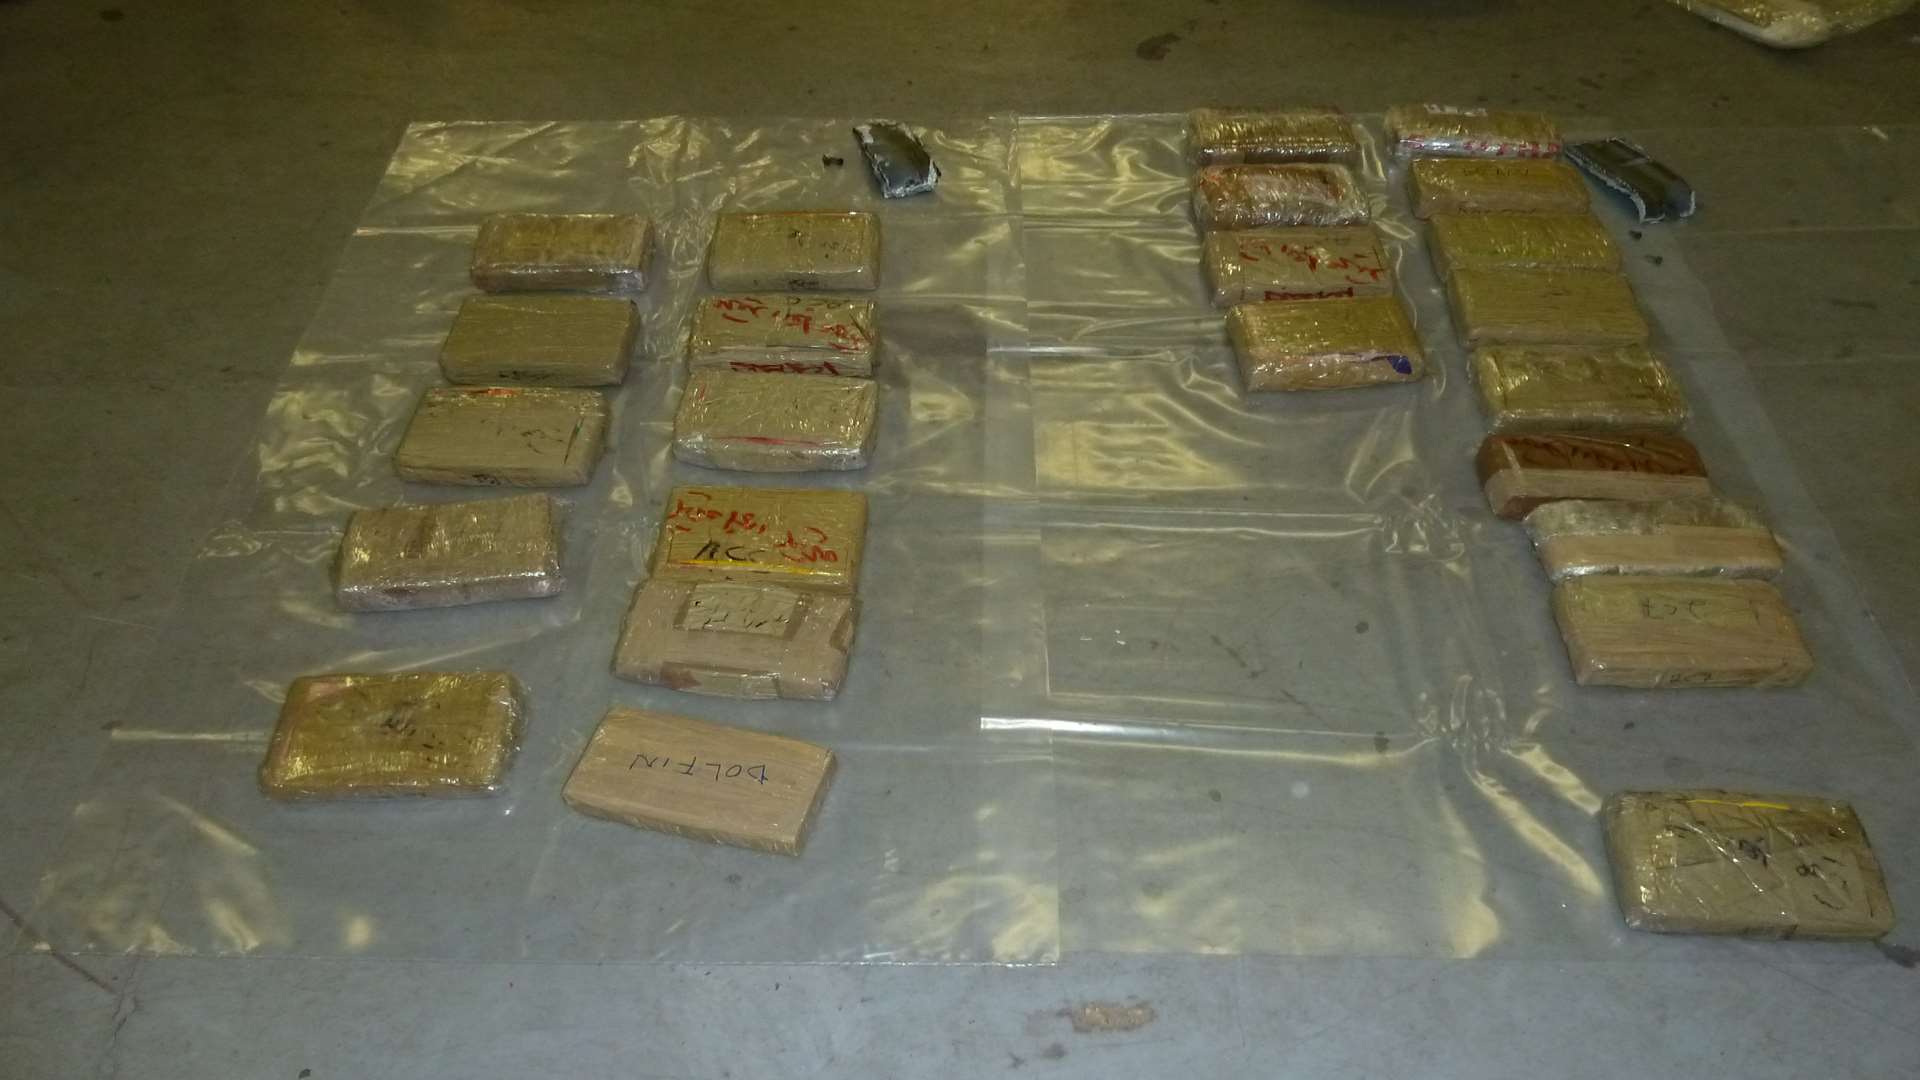 The cocaine found during the raid at the Channel Tunnel in France is said to be worth £1 million. Picture: Home Office